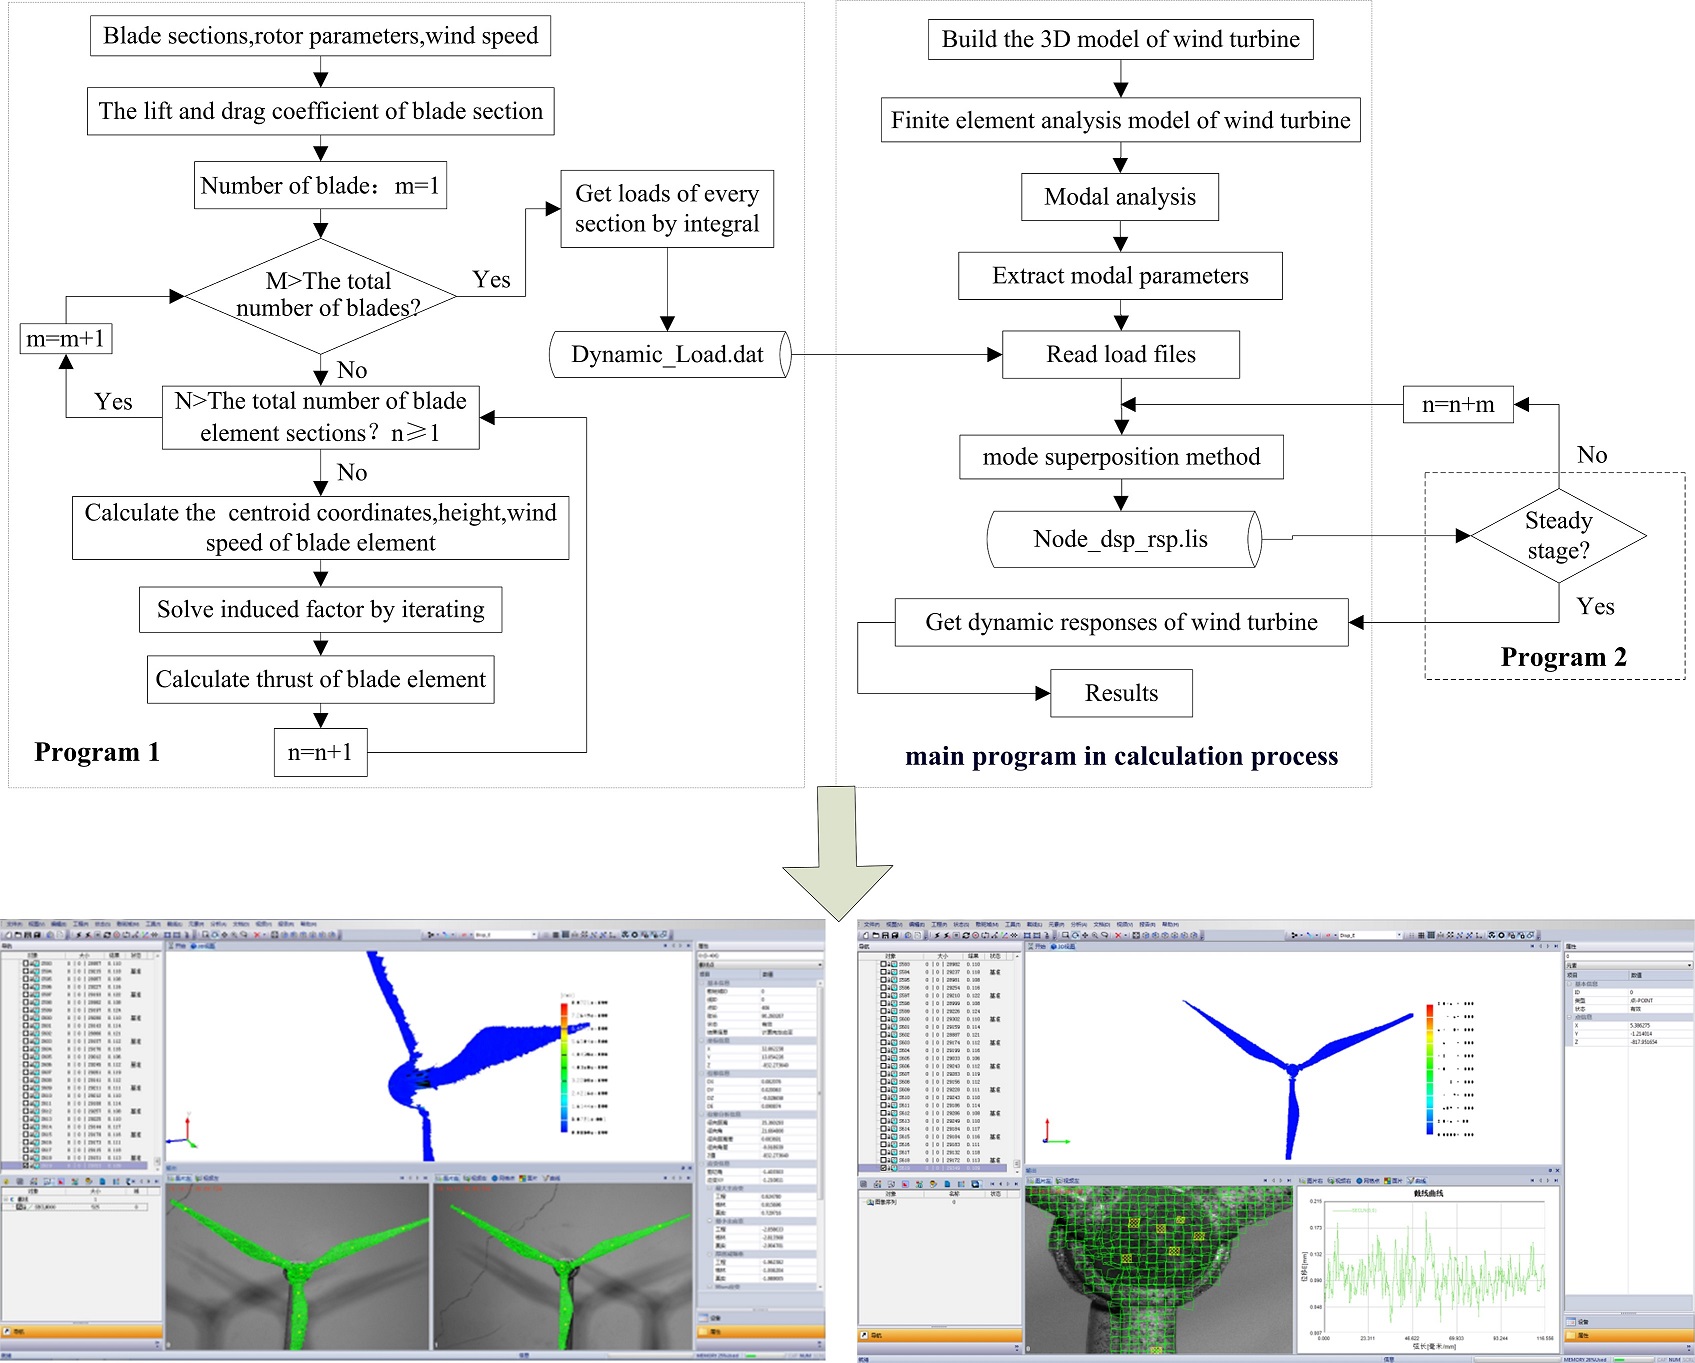 Dynamic performance analysis for wind turbine in complex conditions